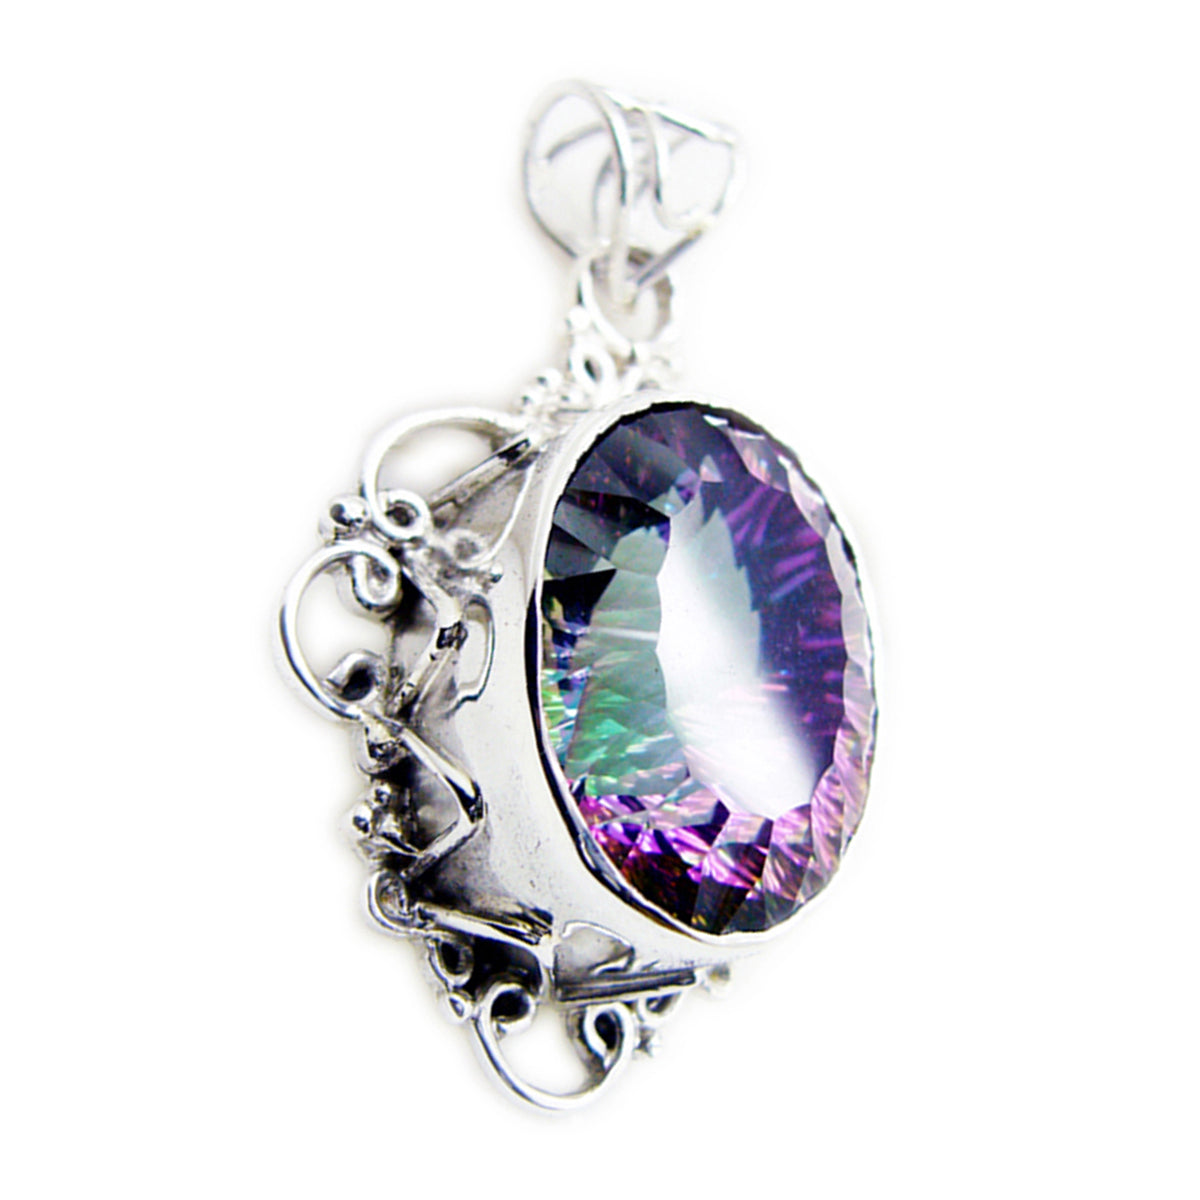 Riyo Cute Gems Oval Faceted Multi Color Mystic Quartz Solid Silver Pendant Gift For Easter Sunday